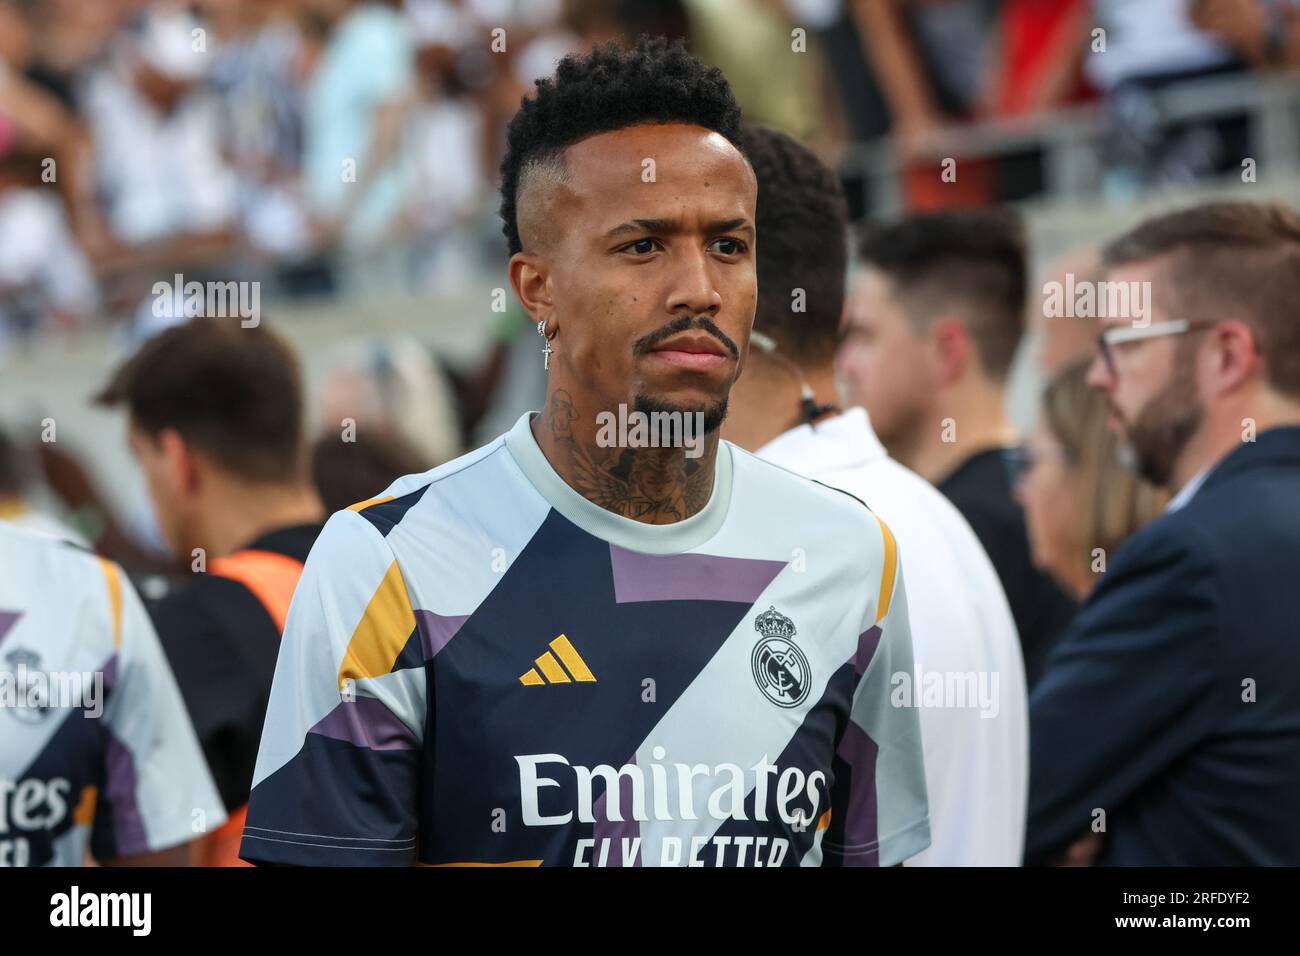 United States this Wednesday, August 2nd. Éder Militão of Real Madrid during a match against Juventus, International friendly at Camping World Stadium in the city of Orlando in the United States this Wednesday, August 2nd. Credit: Brazil Photo Press/Alamy Live News Stock Photo